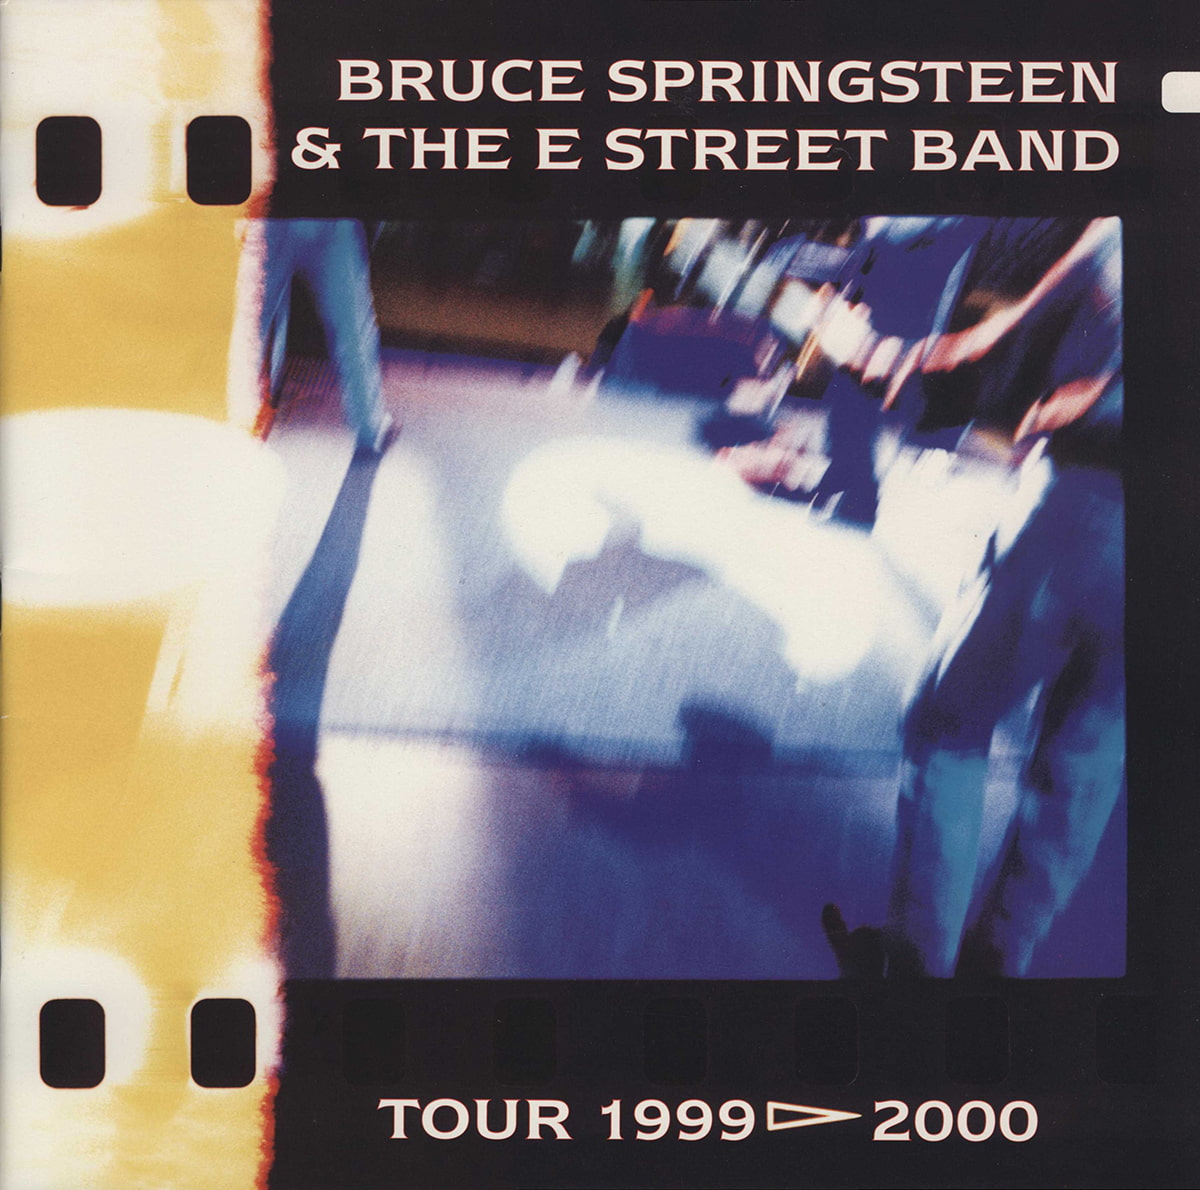 Bruce Springsteen and the E Street Band Reunion Tour book